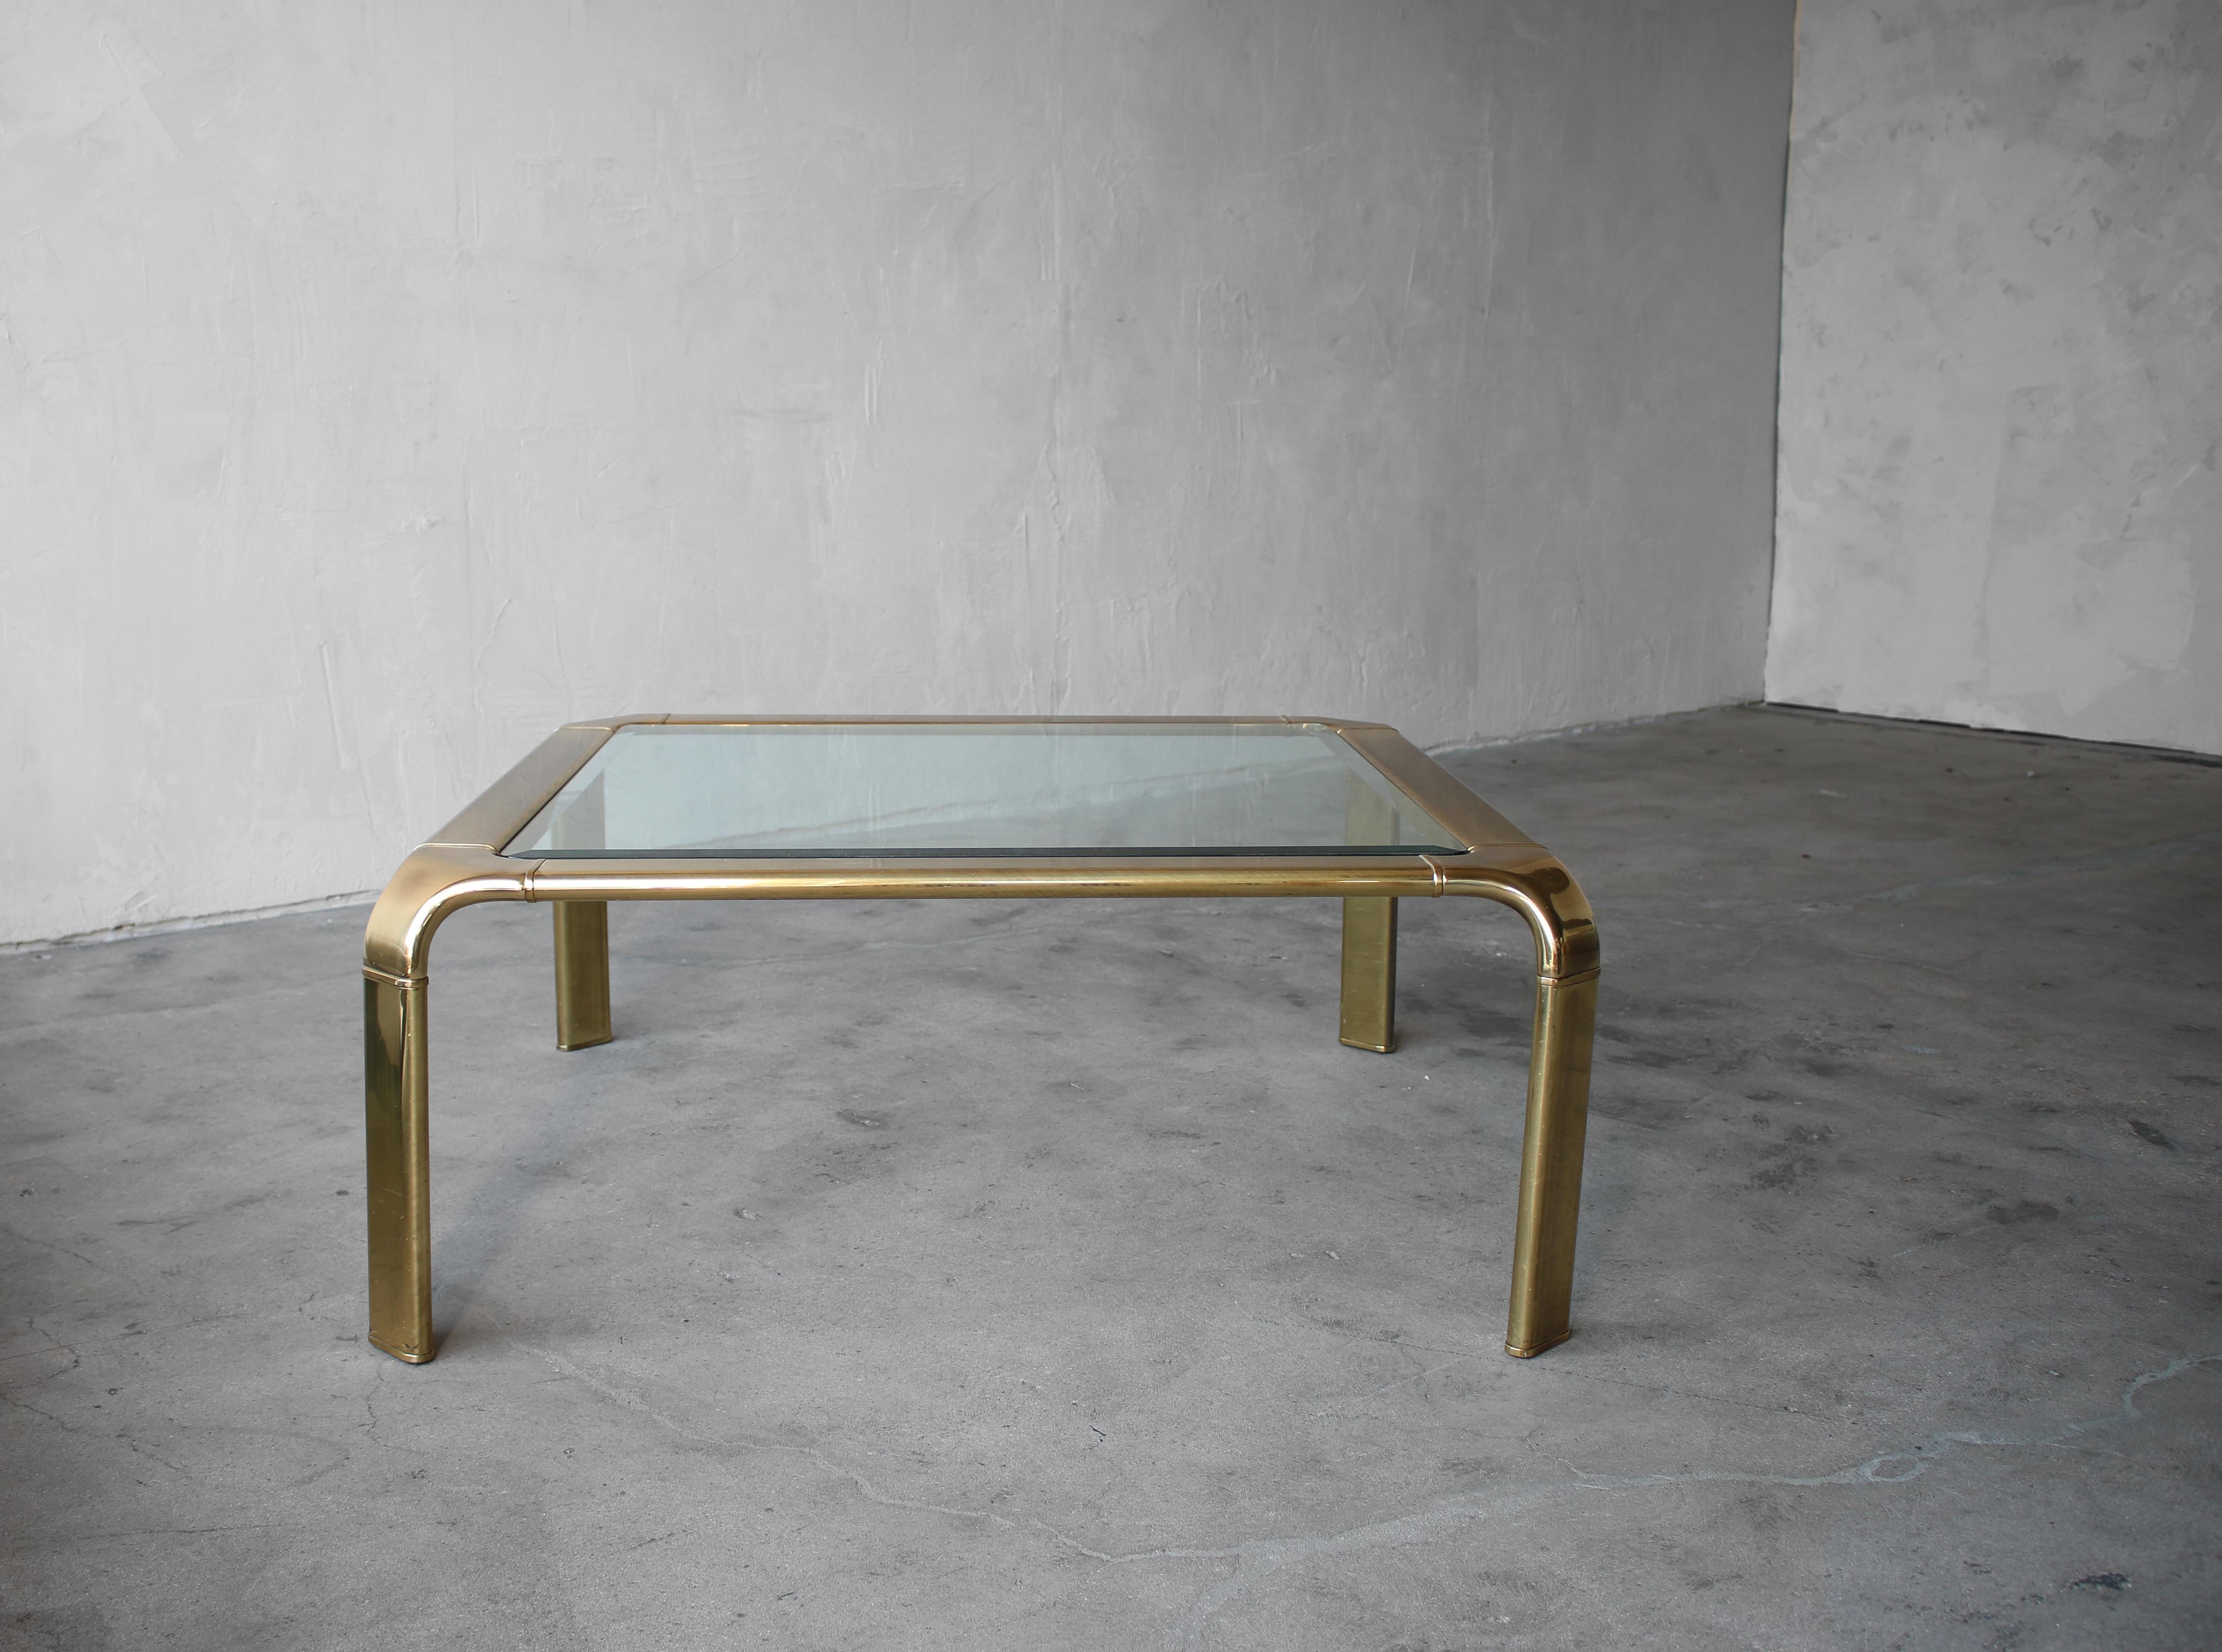 A simple, beautiful brass and glass coffee table by John Widdicomb.

Table is in excellent condition showing little to no wear.